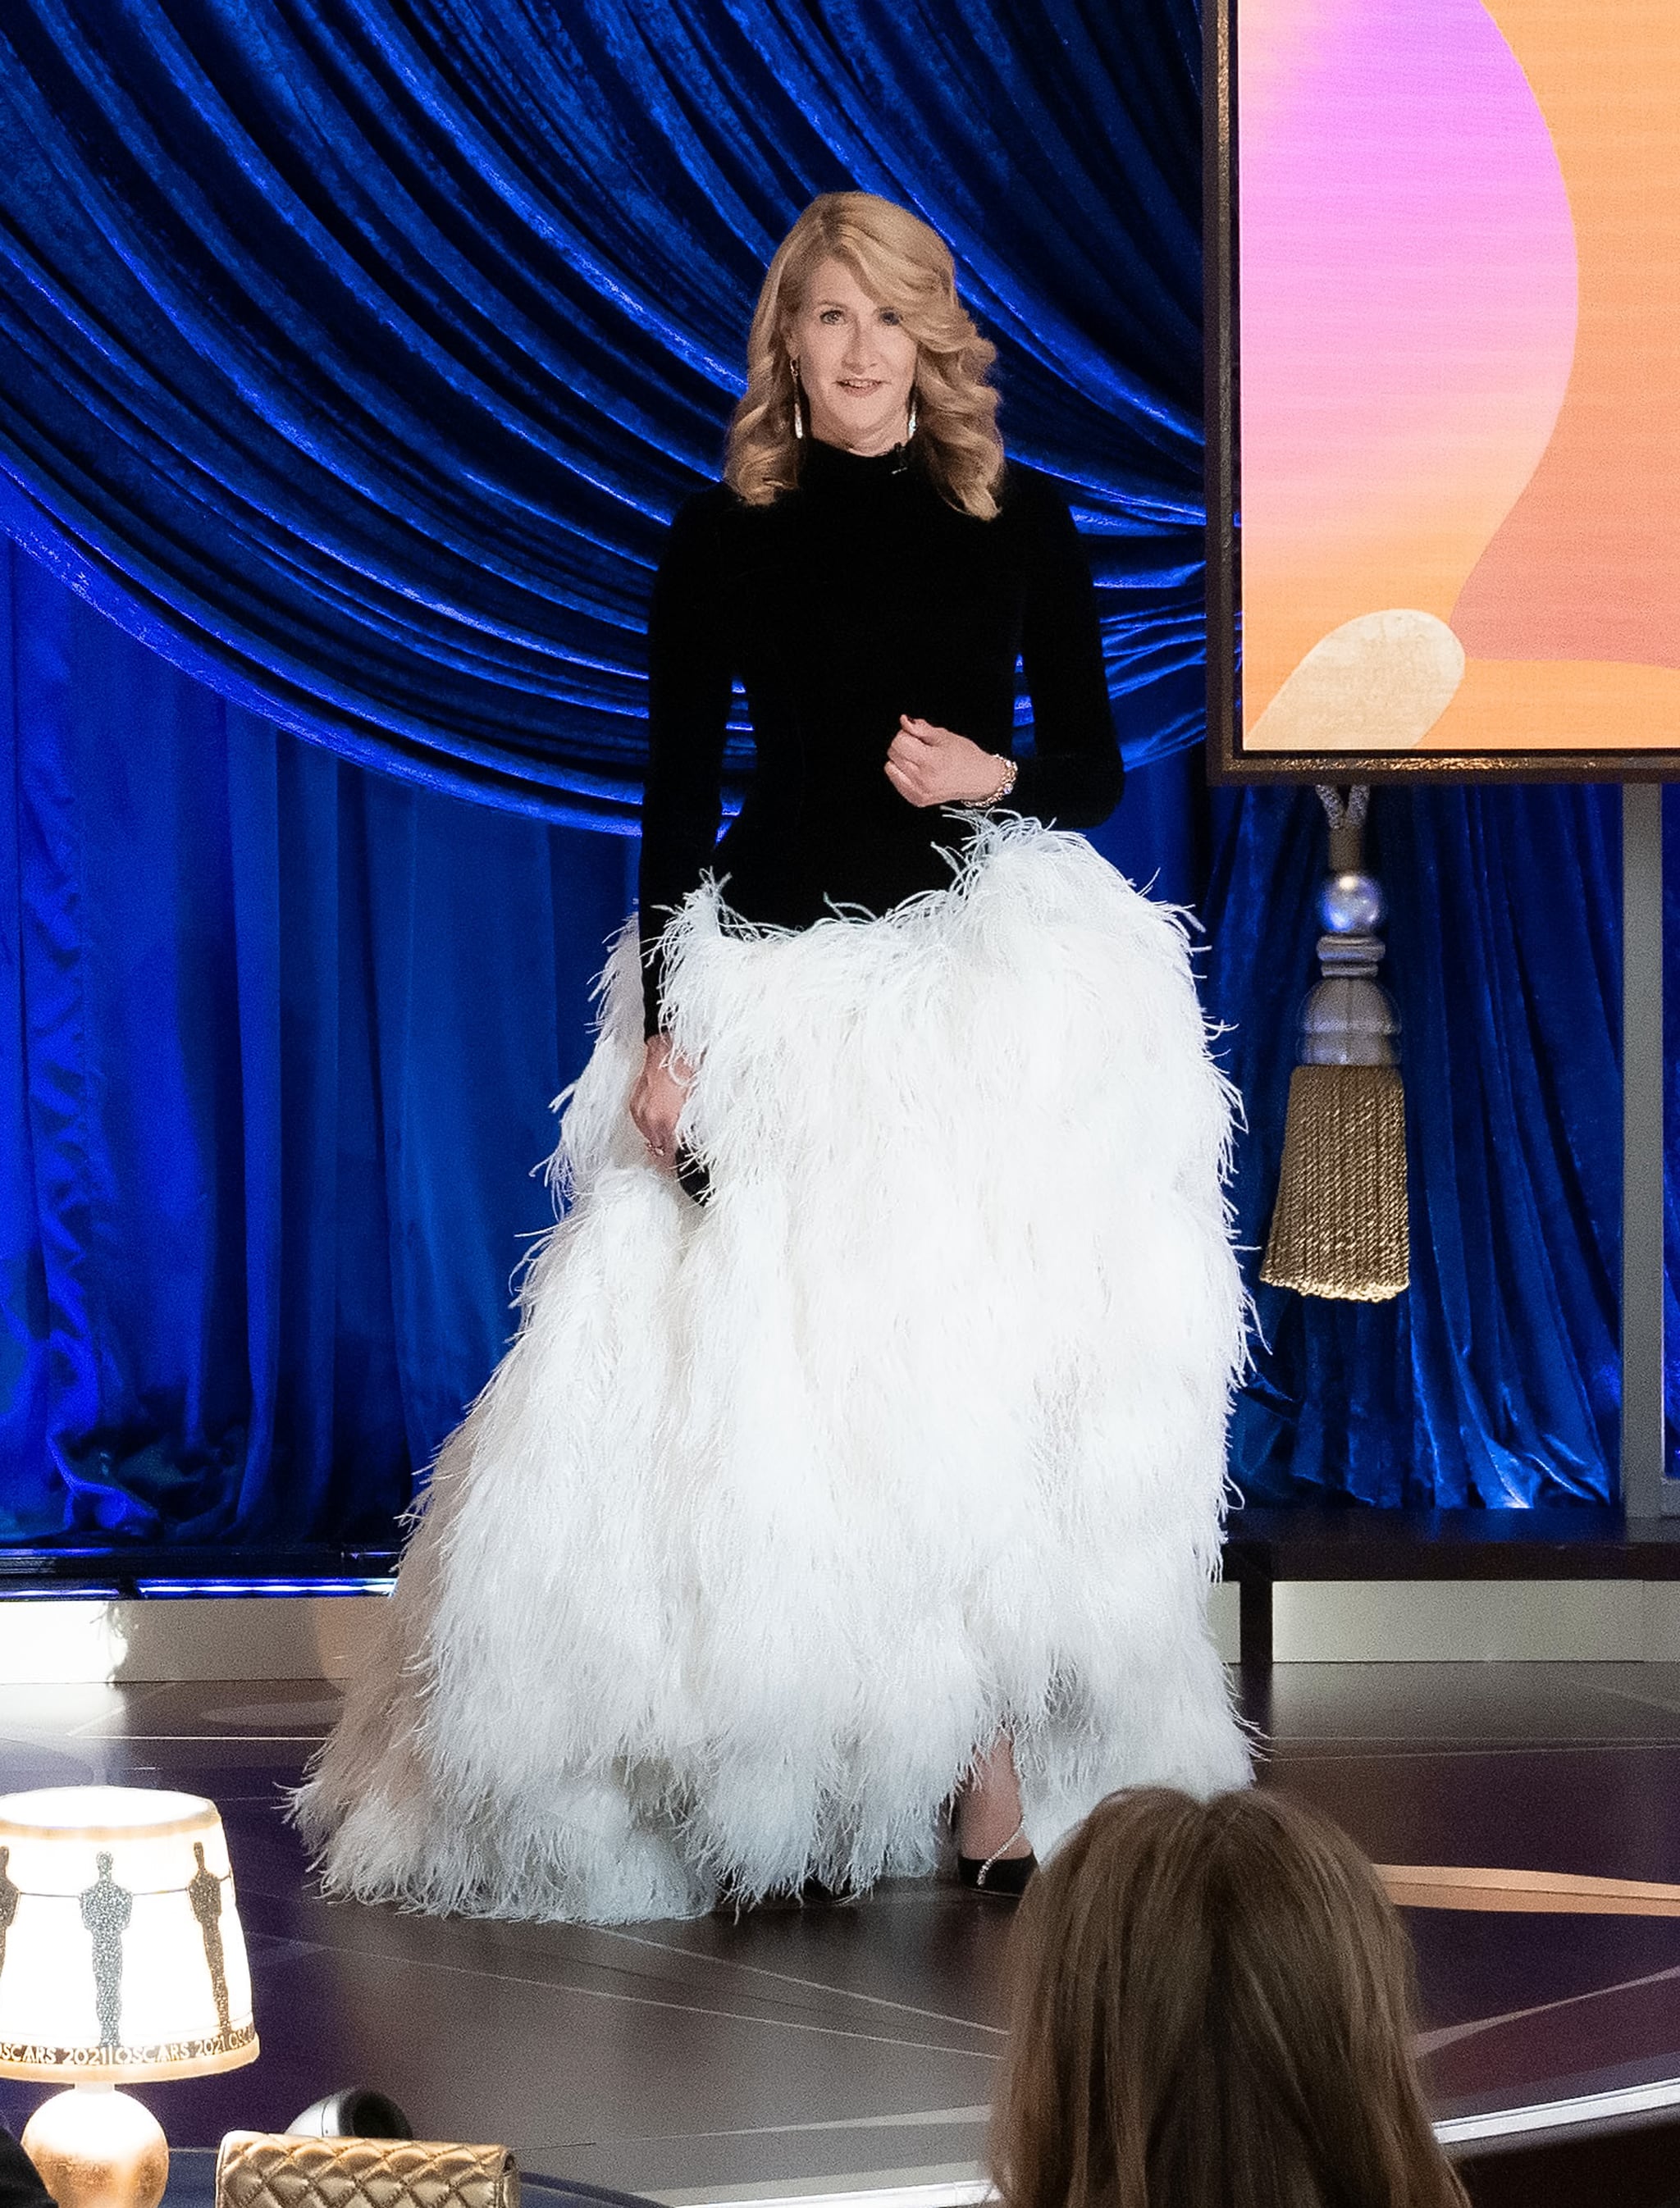 Laura Dern Oscars dress: Feathered gown stuns at 2021 Academy Awards